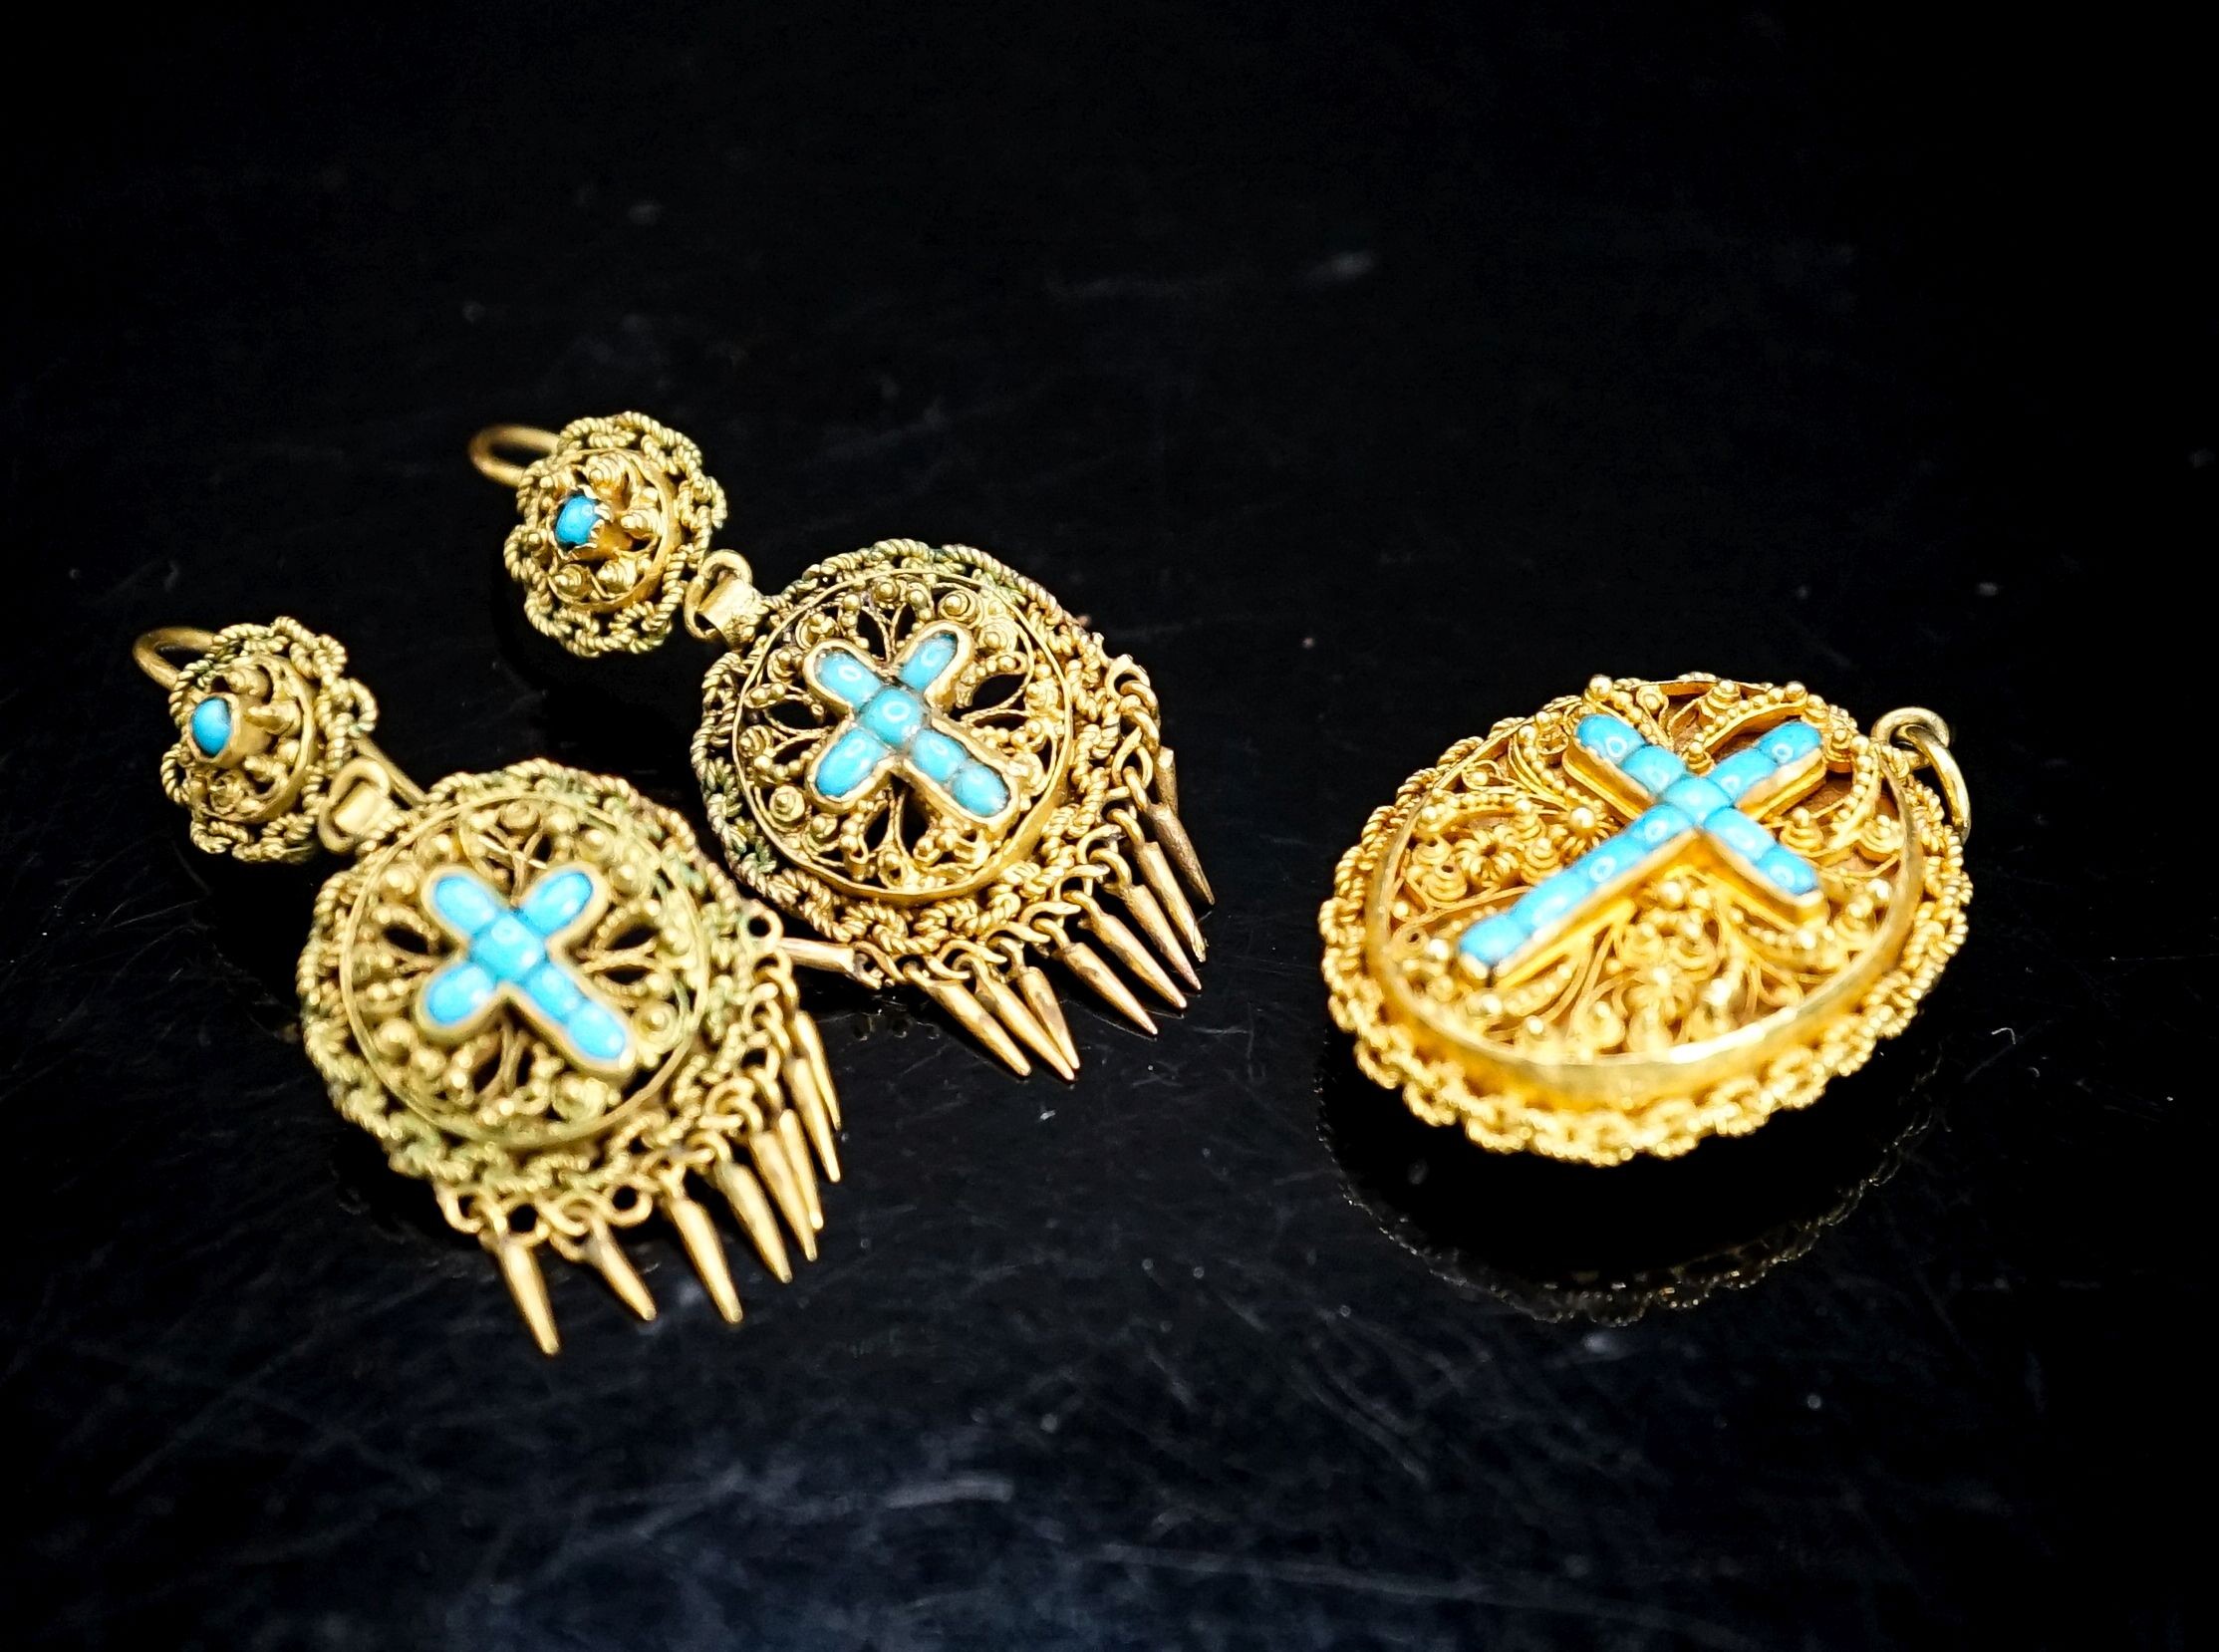 A Victorian yellow metal and turquoise set oval memorial pendant, 24mm, gross 7.5 grams and a pair of similar gilt metal tassel drop earrings.